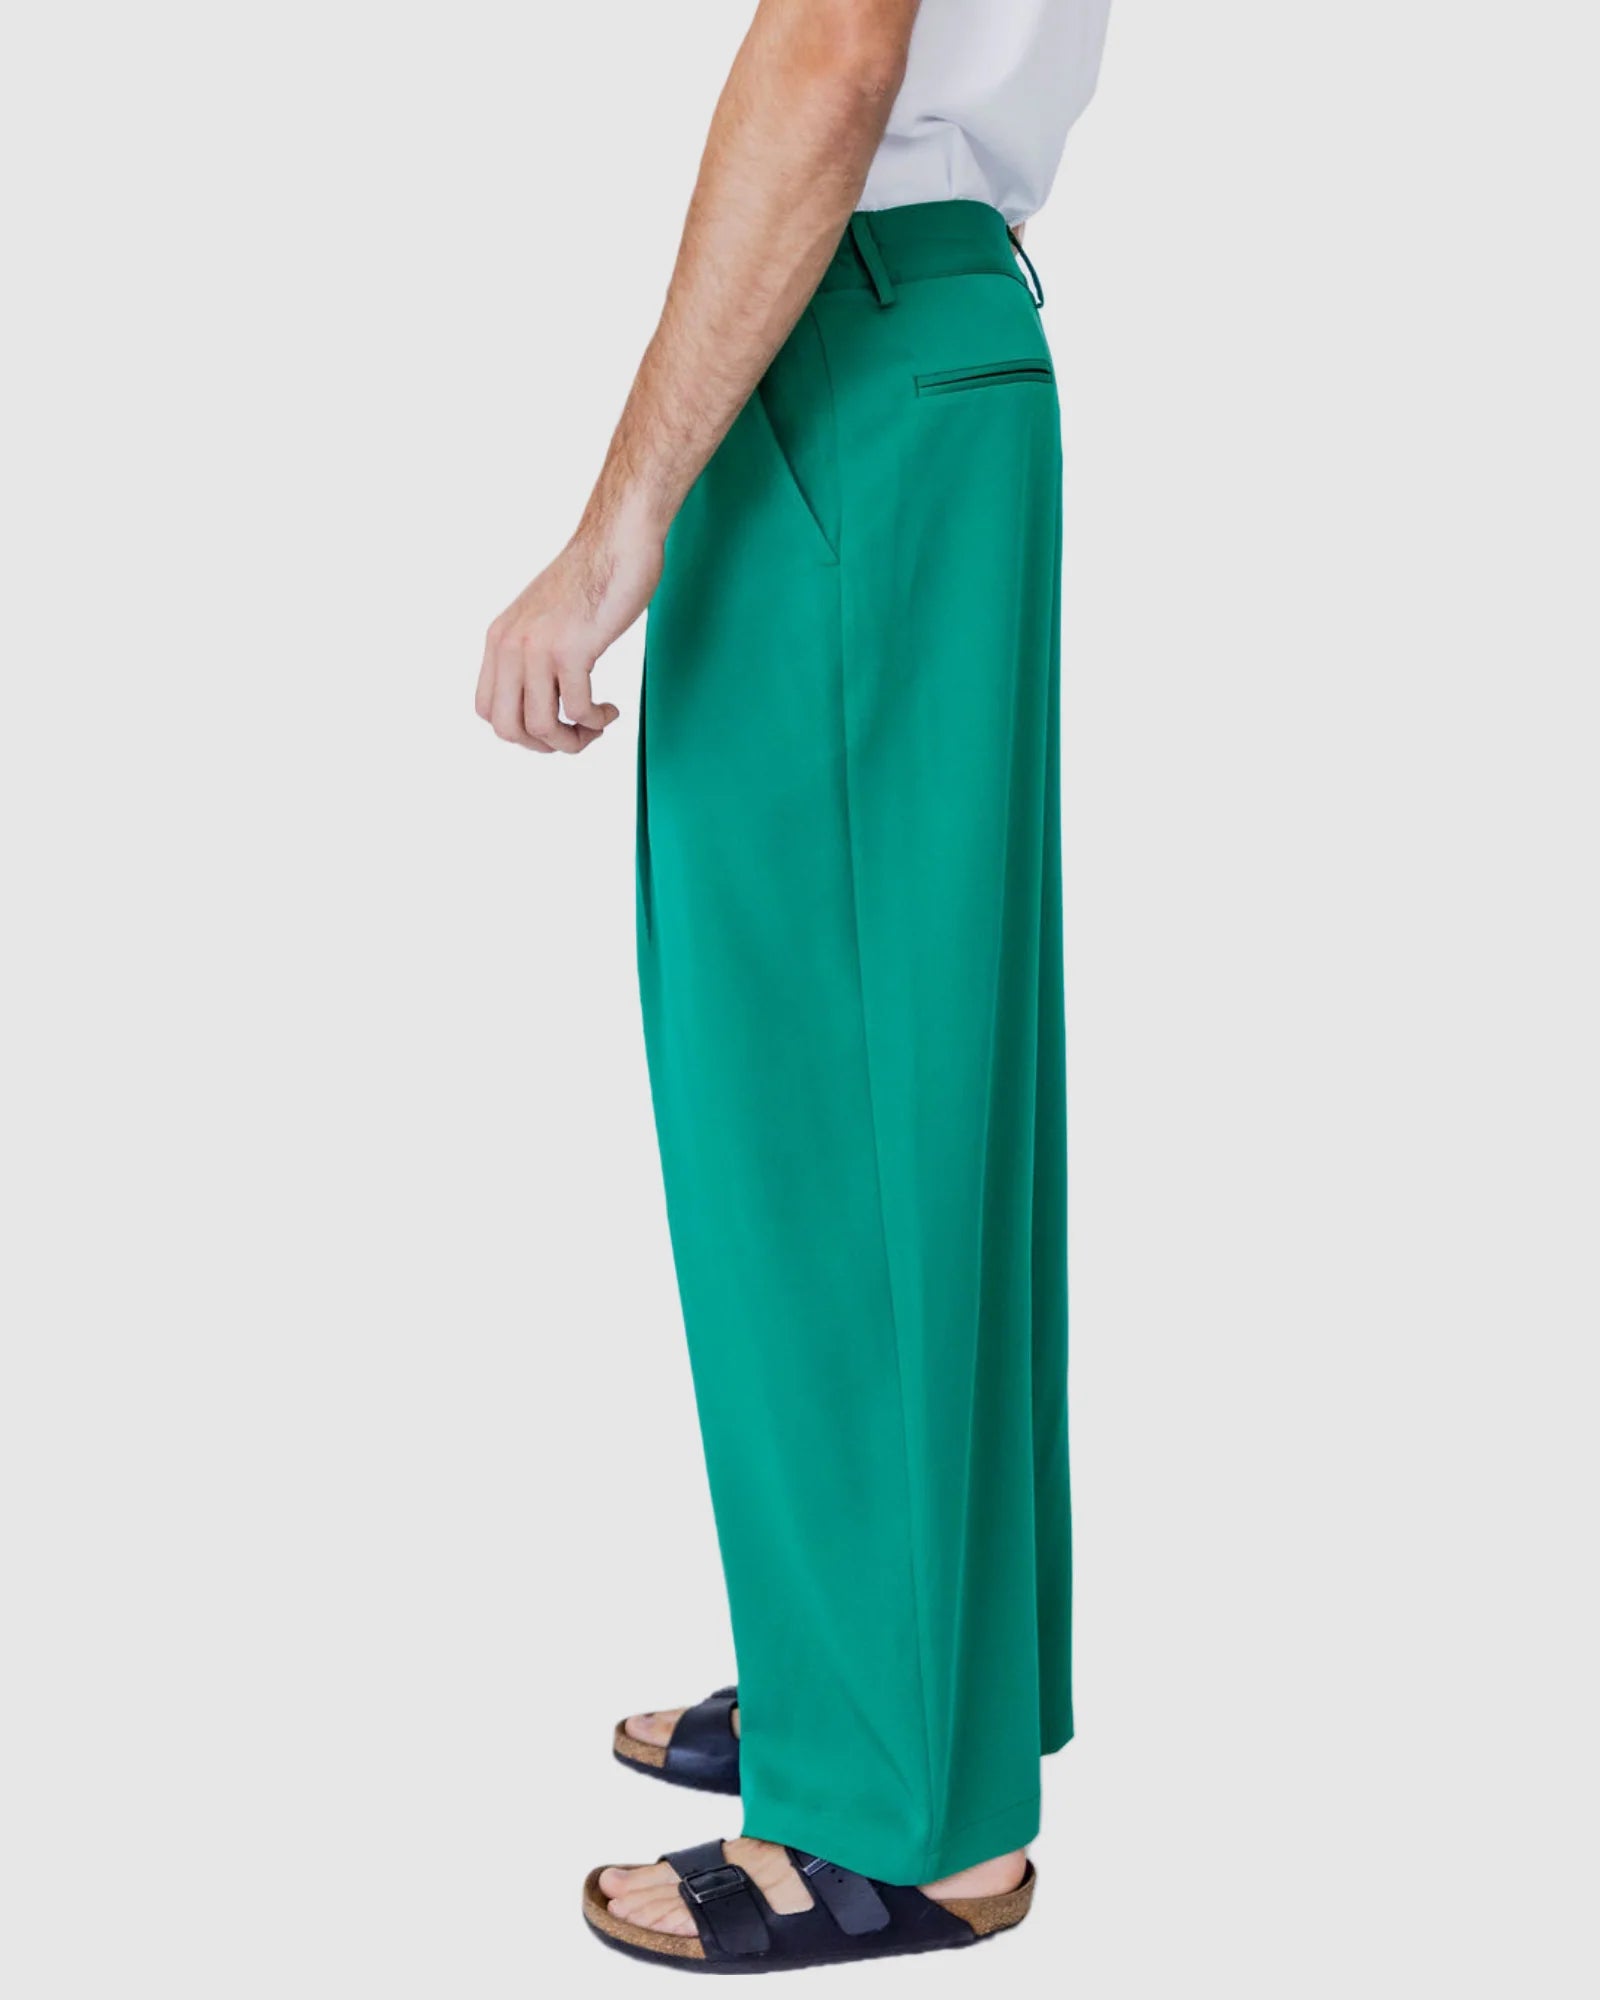 Justin Cassin Cyber Loose Leg Pants in Green Color 3